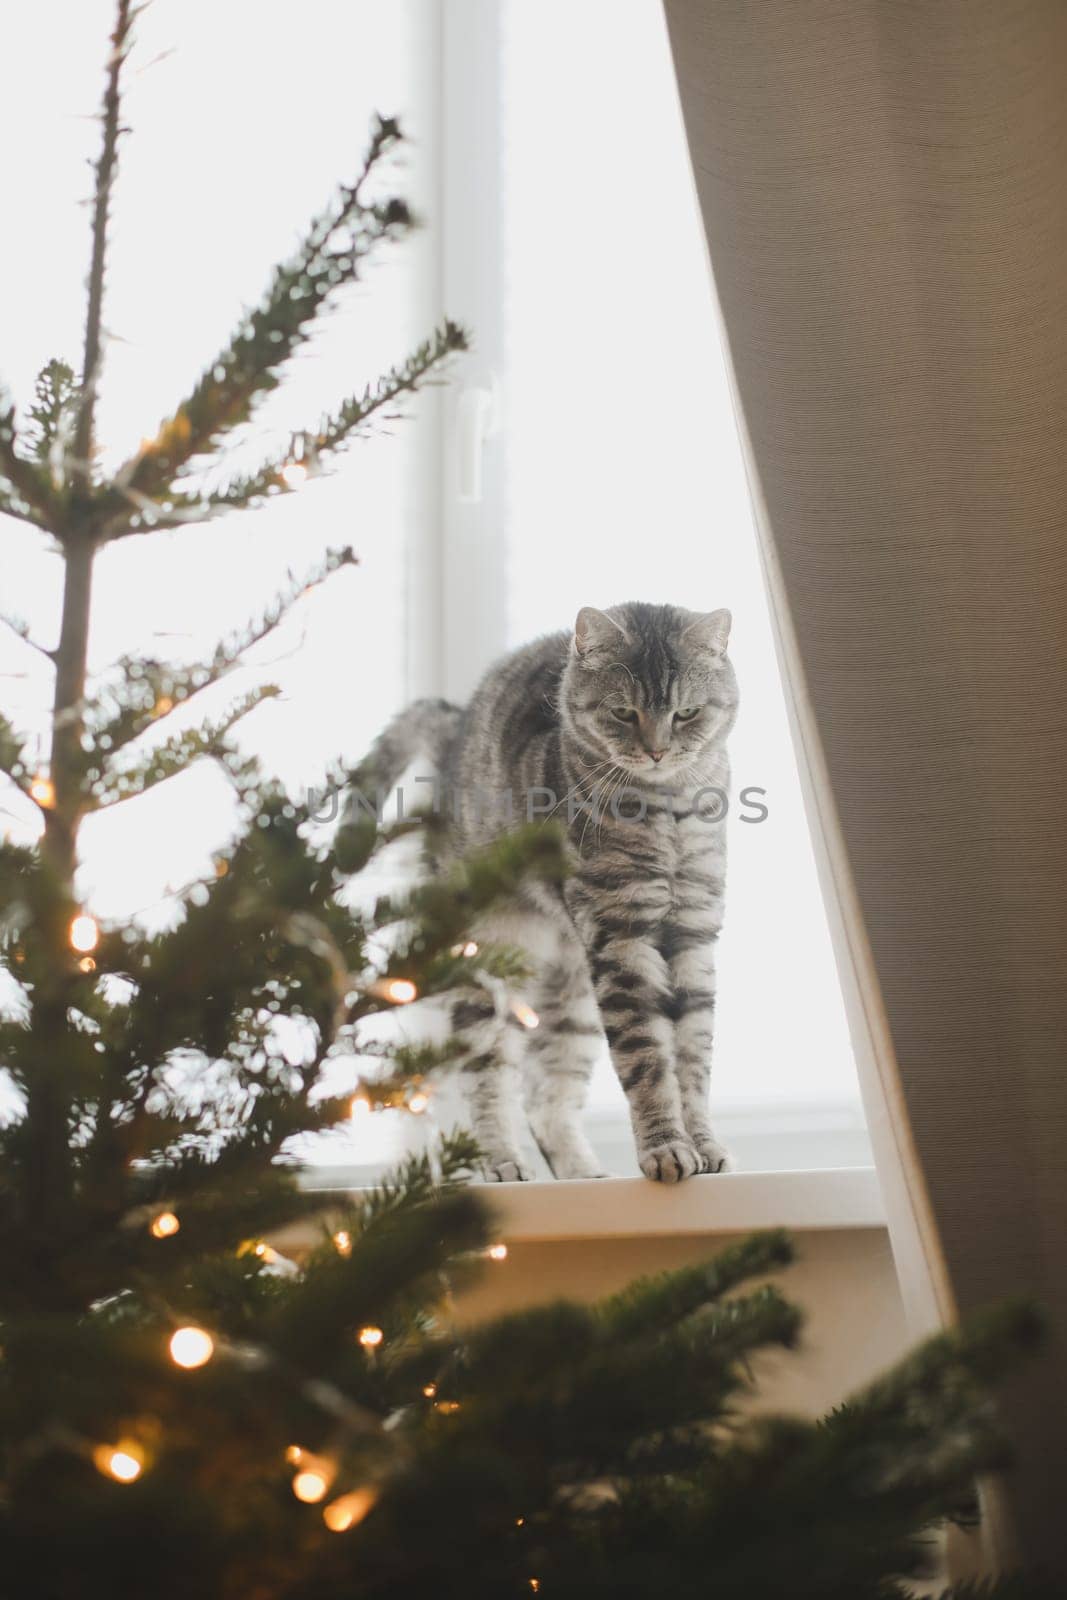 Funny tabby cat and the decorated Christmas tree. Merry Christmas and New Year